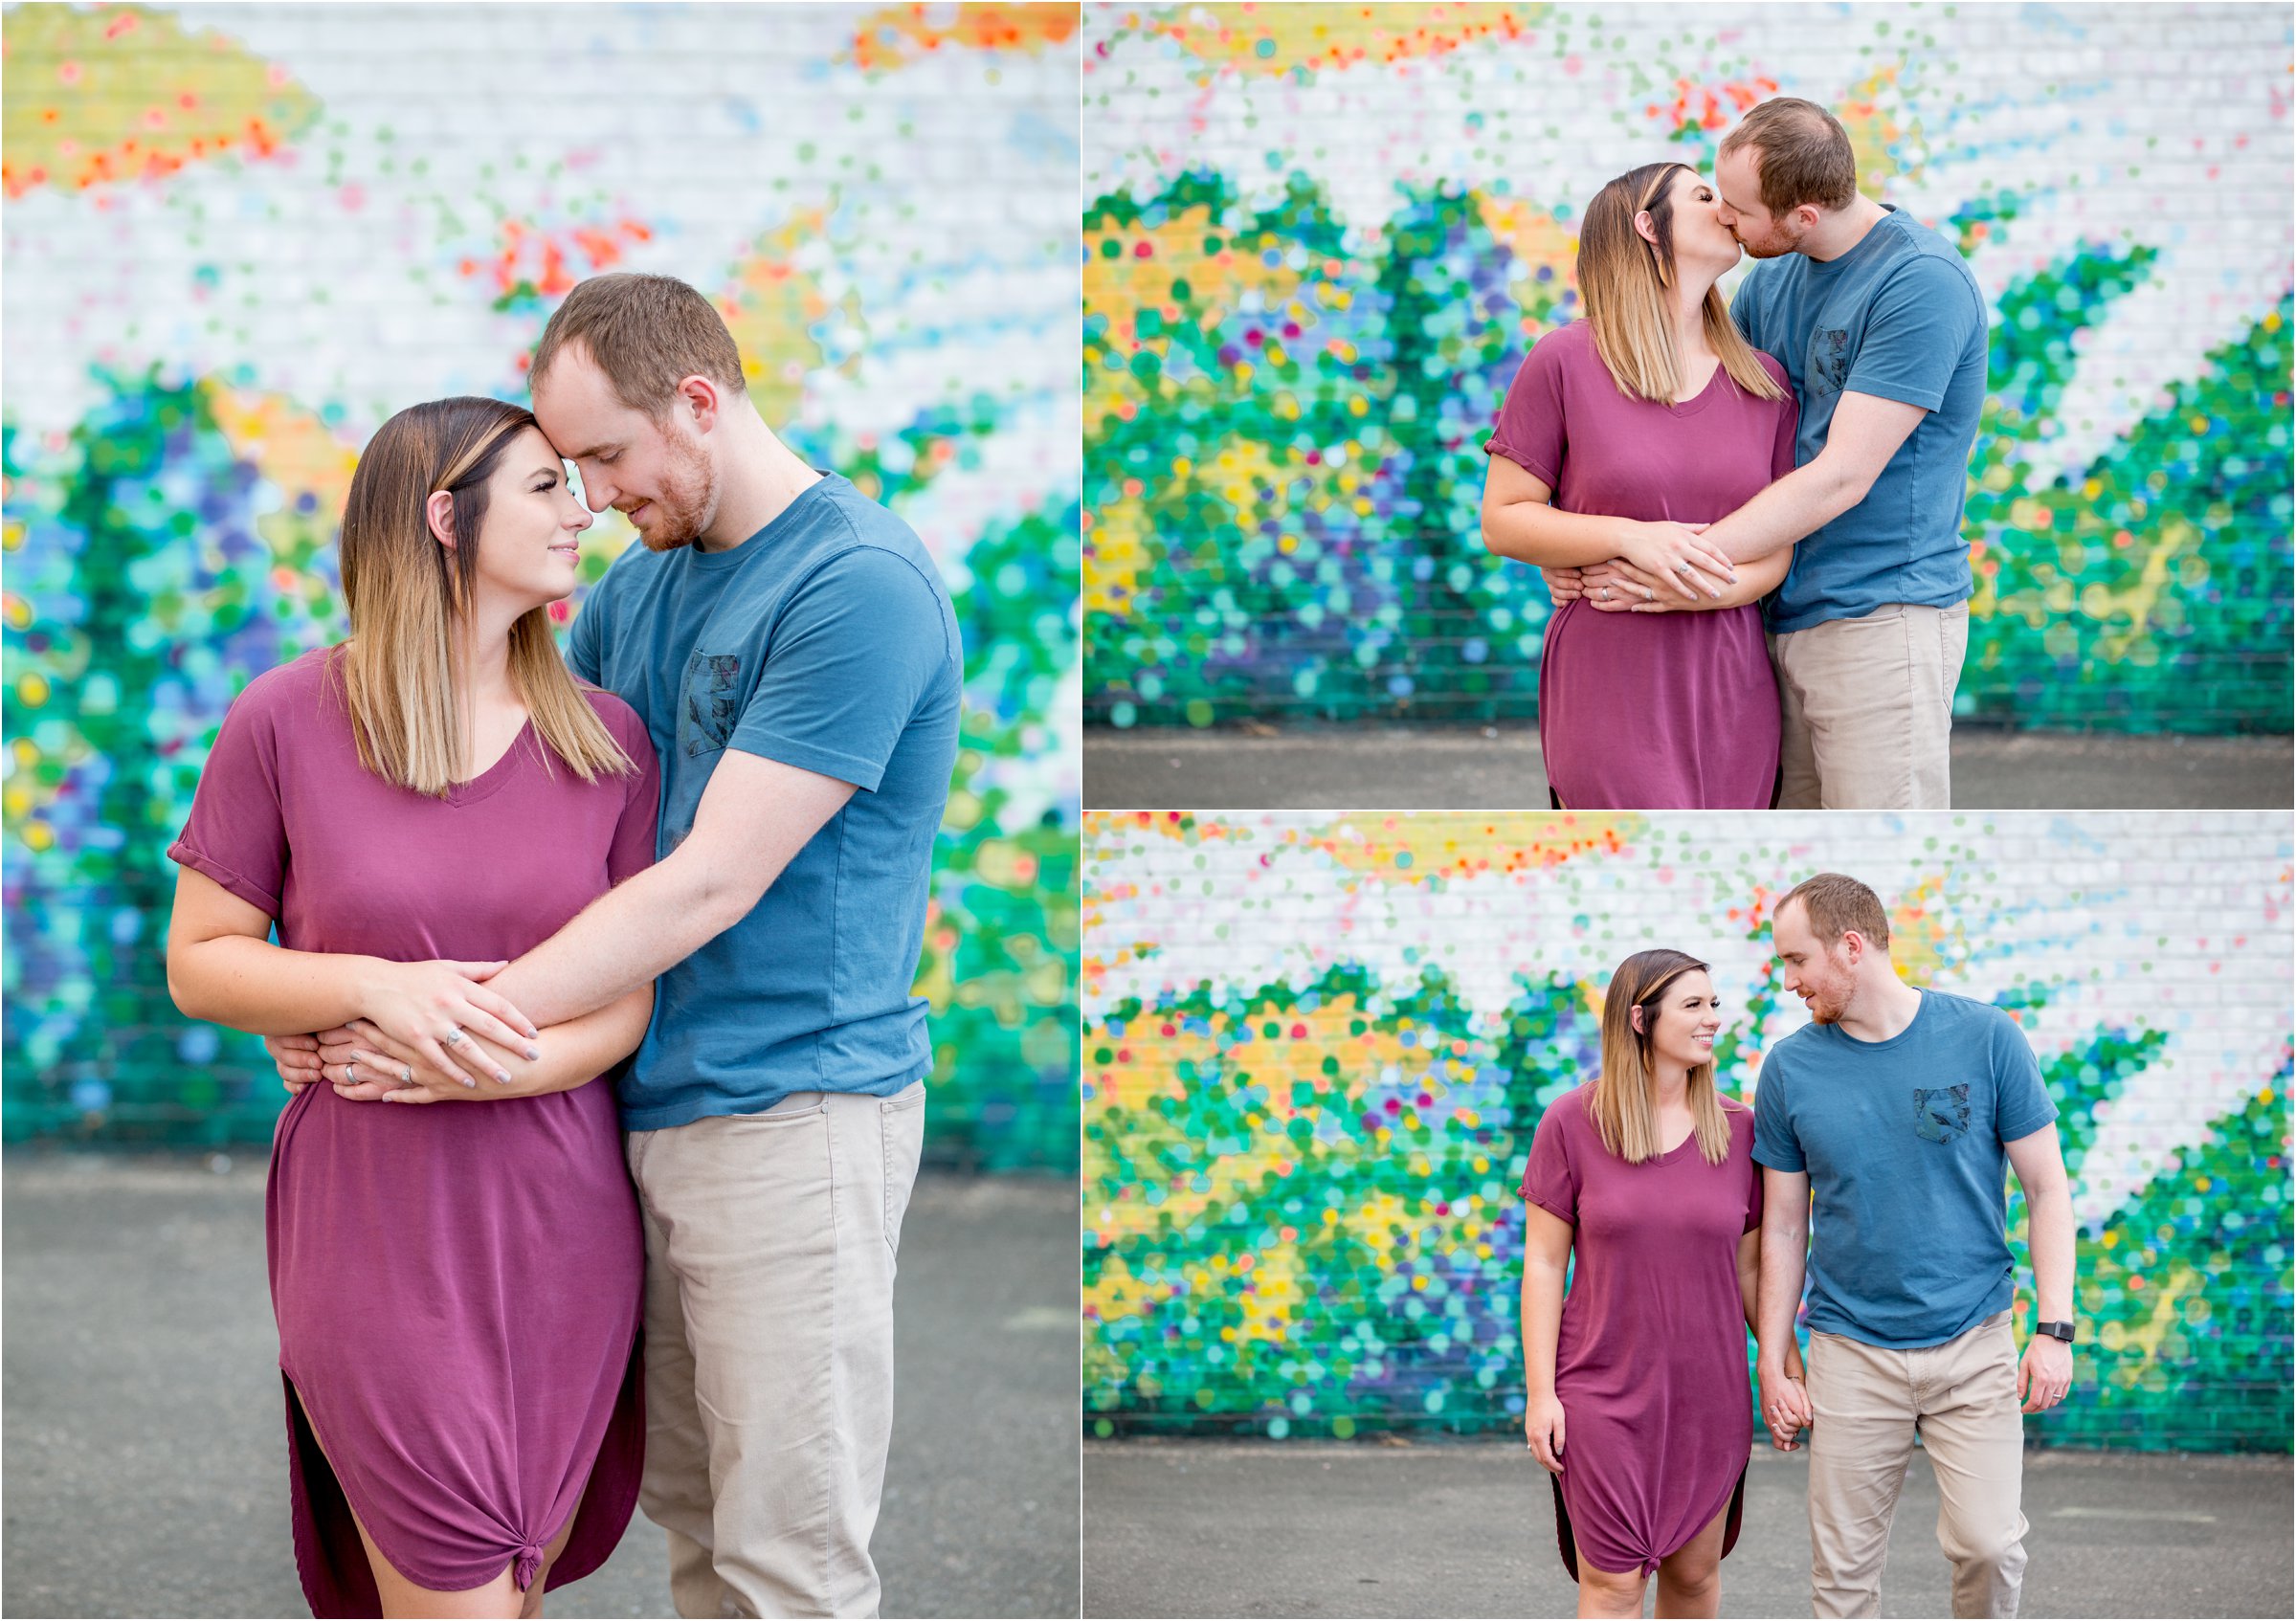 Downtown Greeley, Colorado Love Session by Northern Colrado Wedding and Engagement Photographer